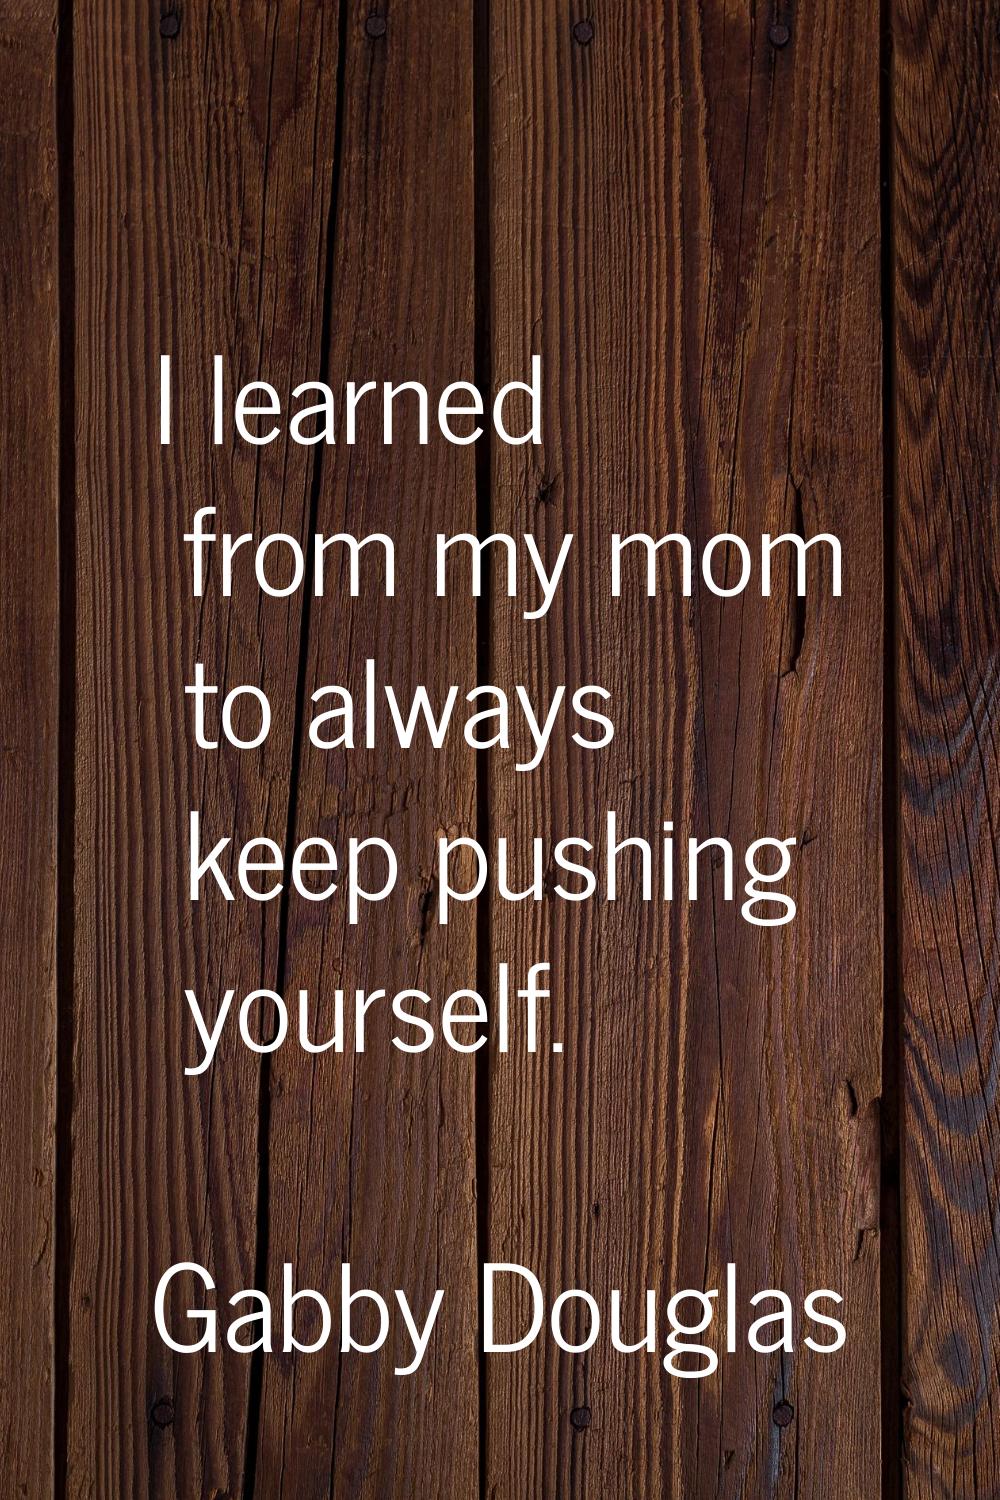 I learned from my mom to always keep pushing yourself.